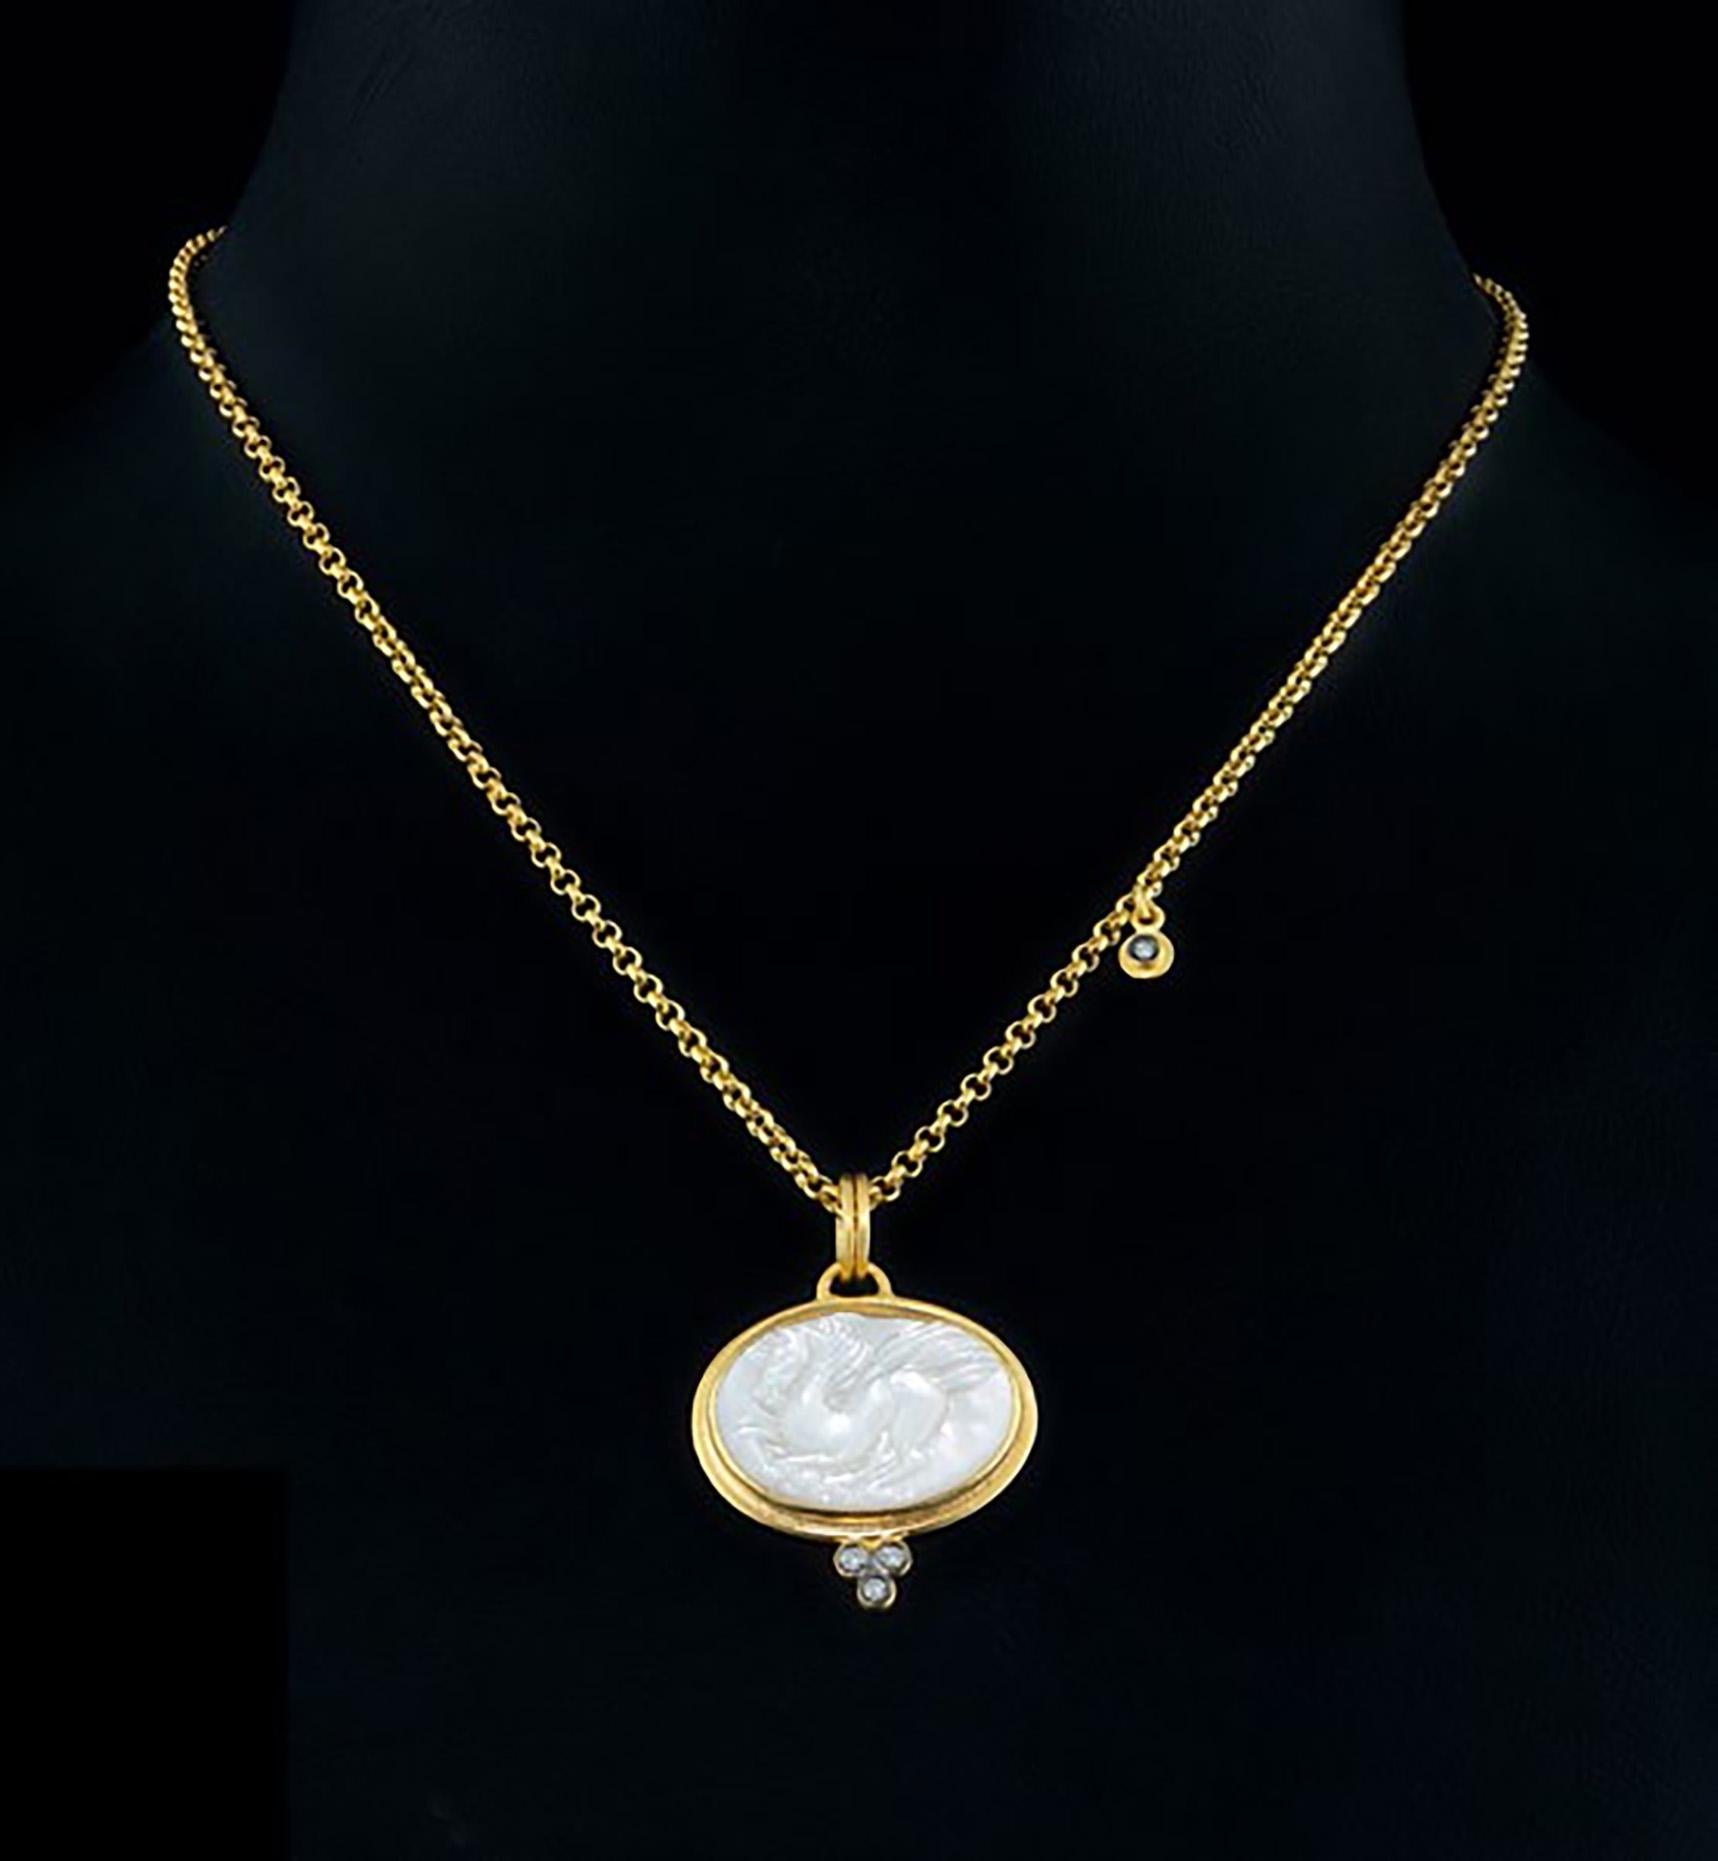 Byzantine 0.05 Carat Diamond, 24K Yellow Gold Mother of Pearl Necklace with Pegsus Carving For Sale